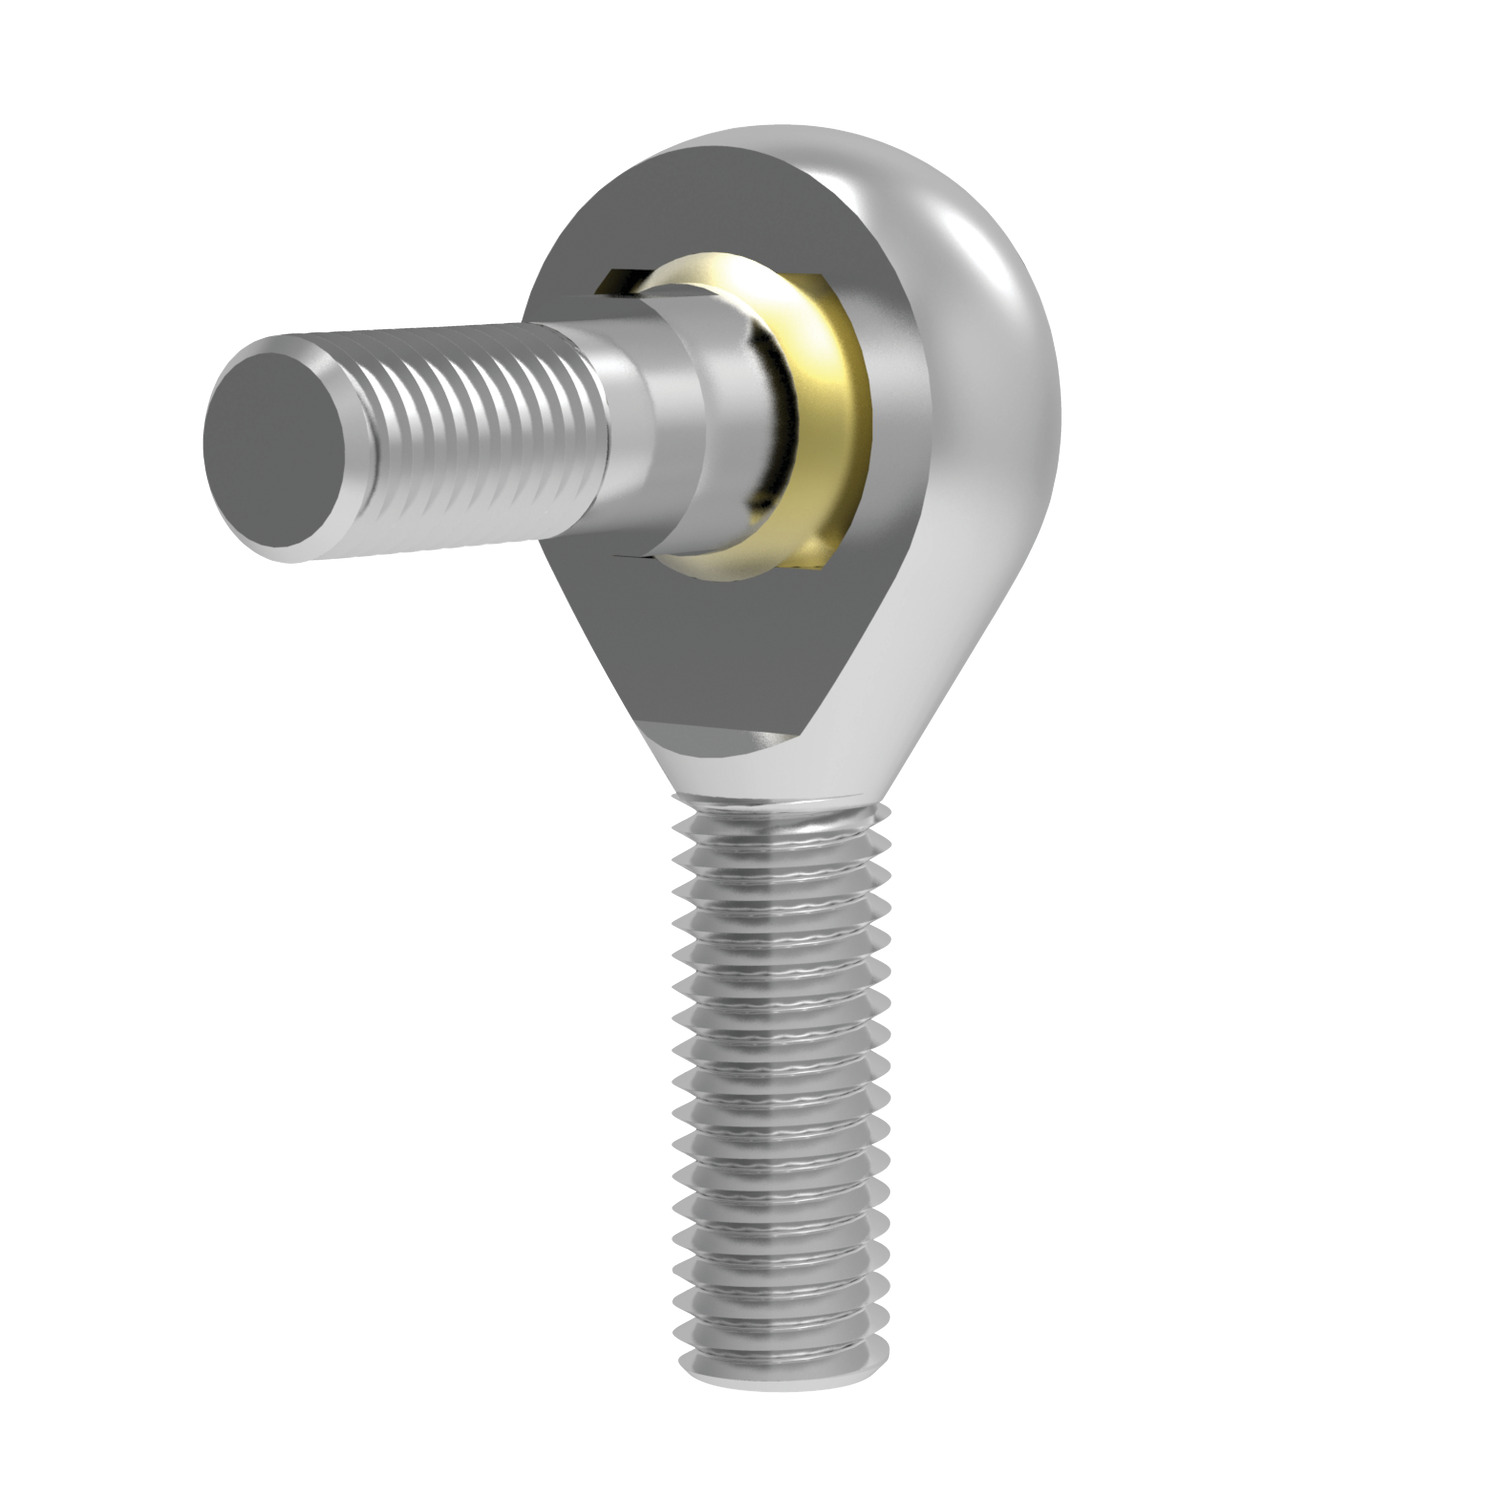 Rod End with Stud - Male Maintenance free, sizes according to DIN ISO 12230-4 series K. 